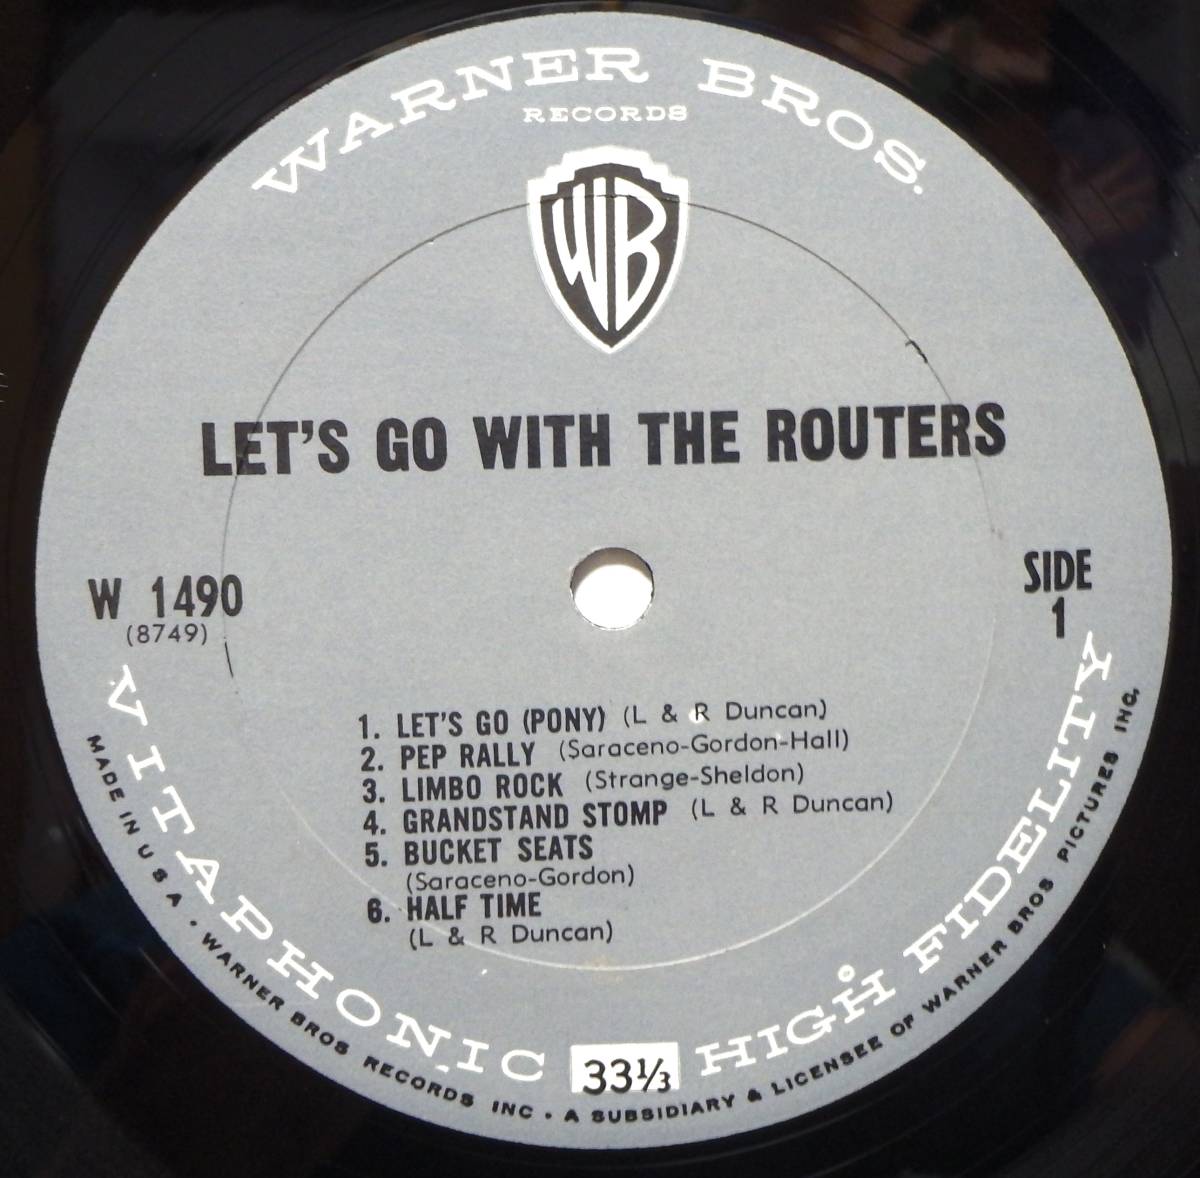 【GI075】THE ROUTERS 「Let's Go! With The Routers」, 63 US mono Original ★エレキ・インスト/サーフの画像4